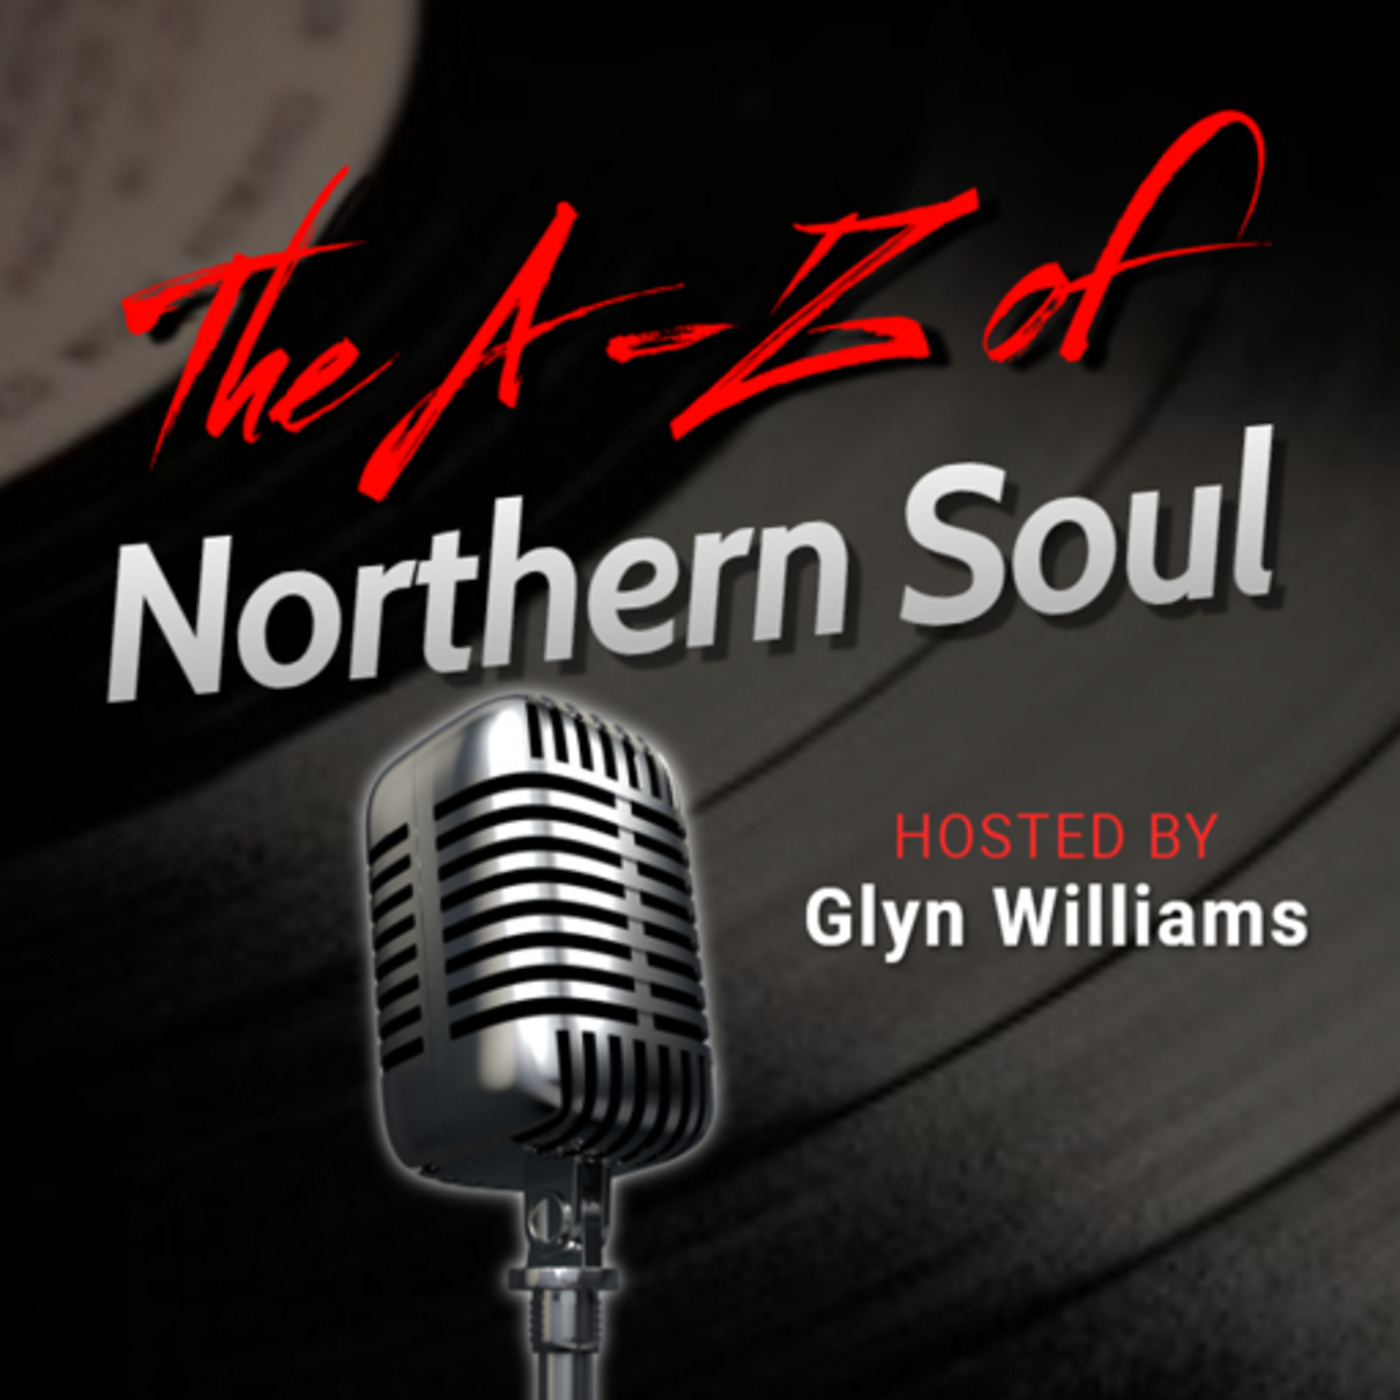 The A-Z of Northern Soul E078